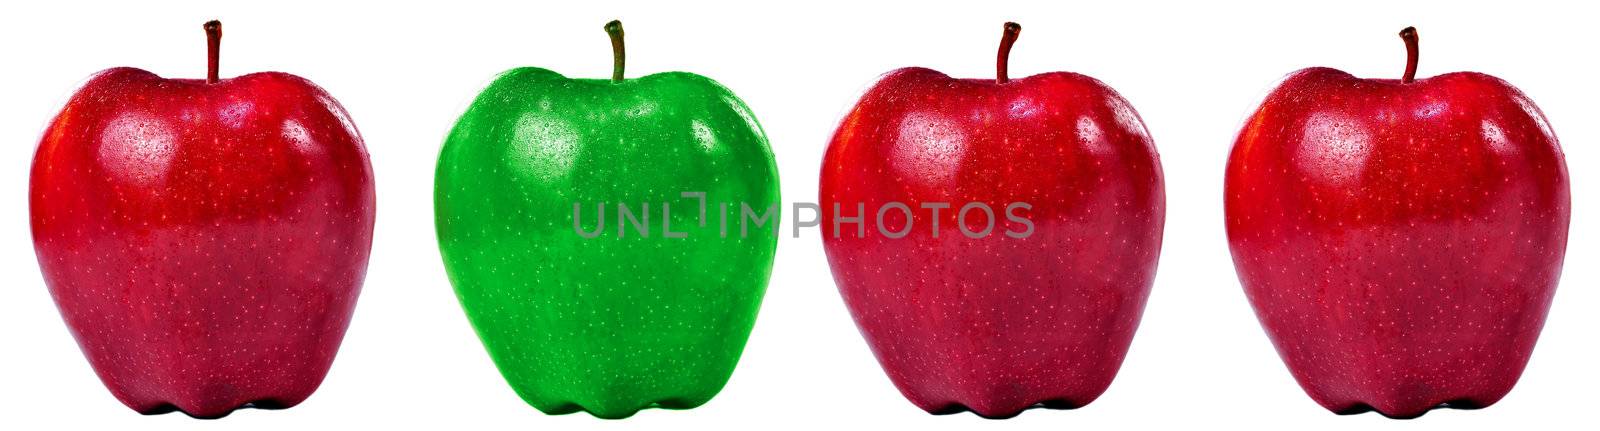 Isolated frontal shot of a group of fresh apples with stems and drops of water on them.